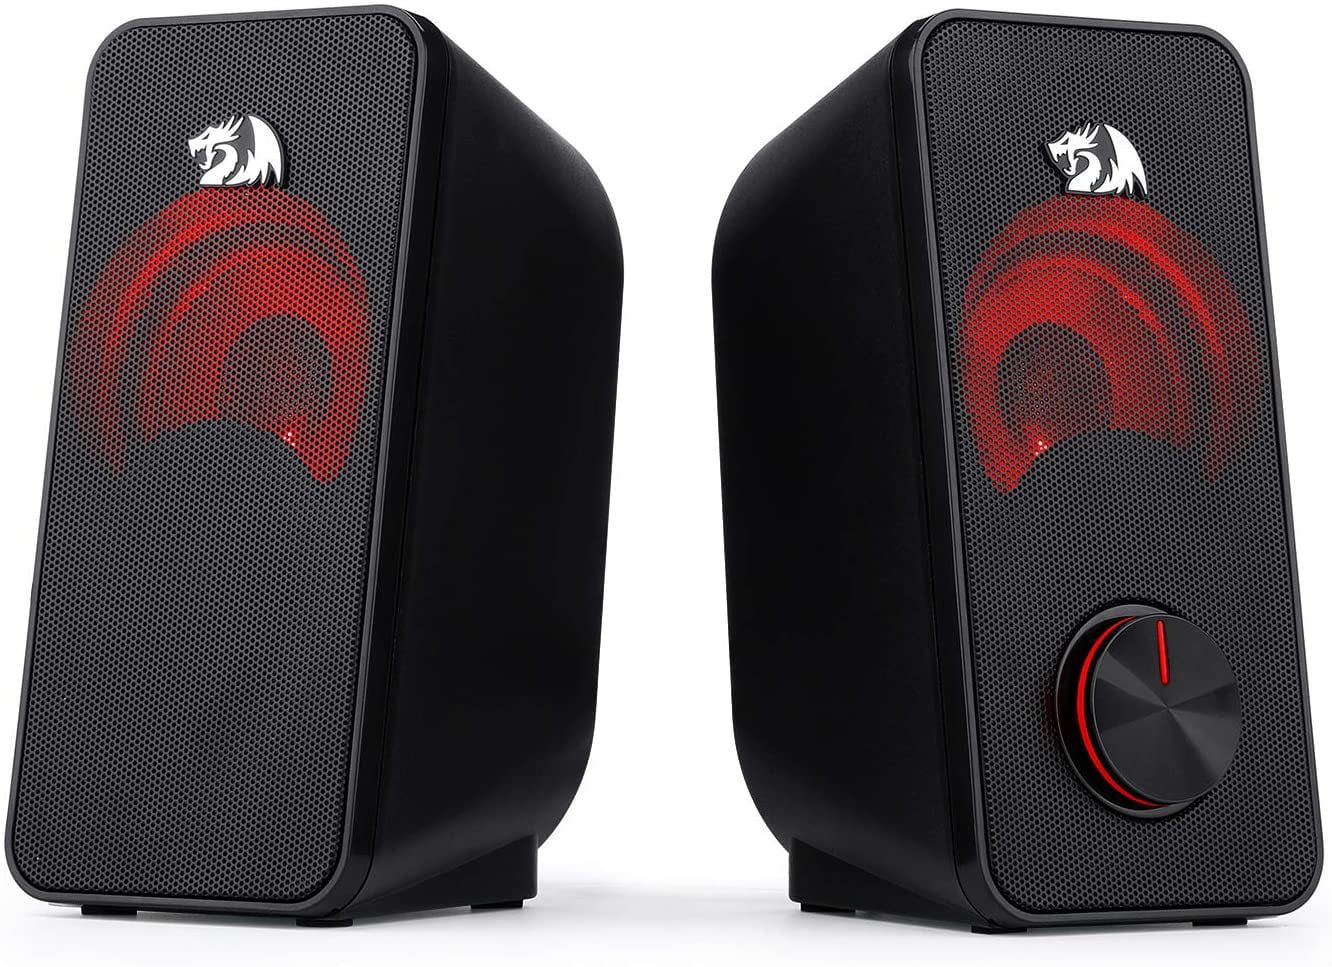 Redragon GS500 Stentor PC Gaming Speaker, 2.0 Channel Stereo Desktop Computer Speaker with Red Backlight Quality Bass and Crystal Clear Sound, USB Powered with a 3.5Mm Connector